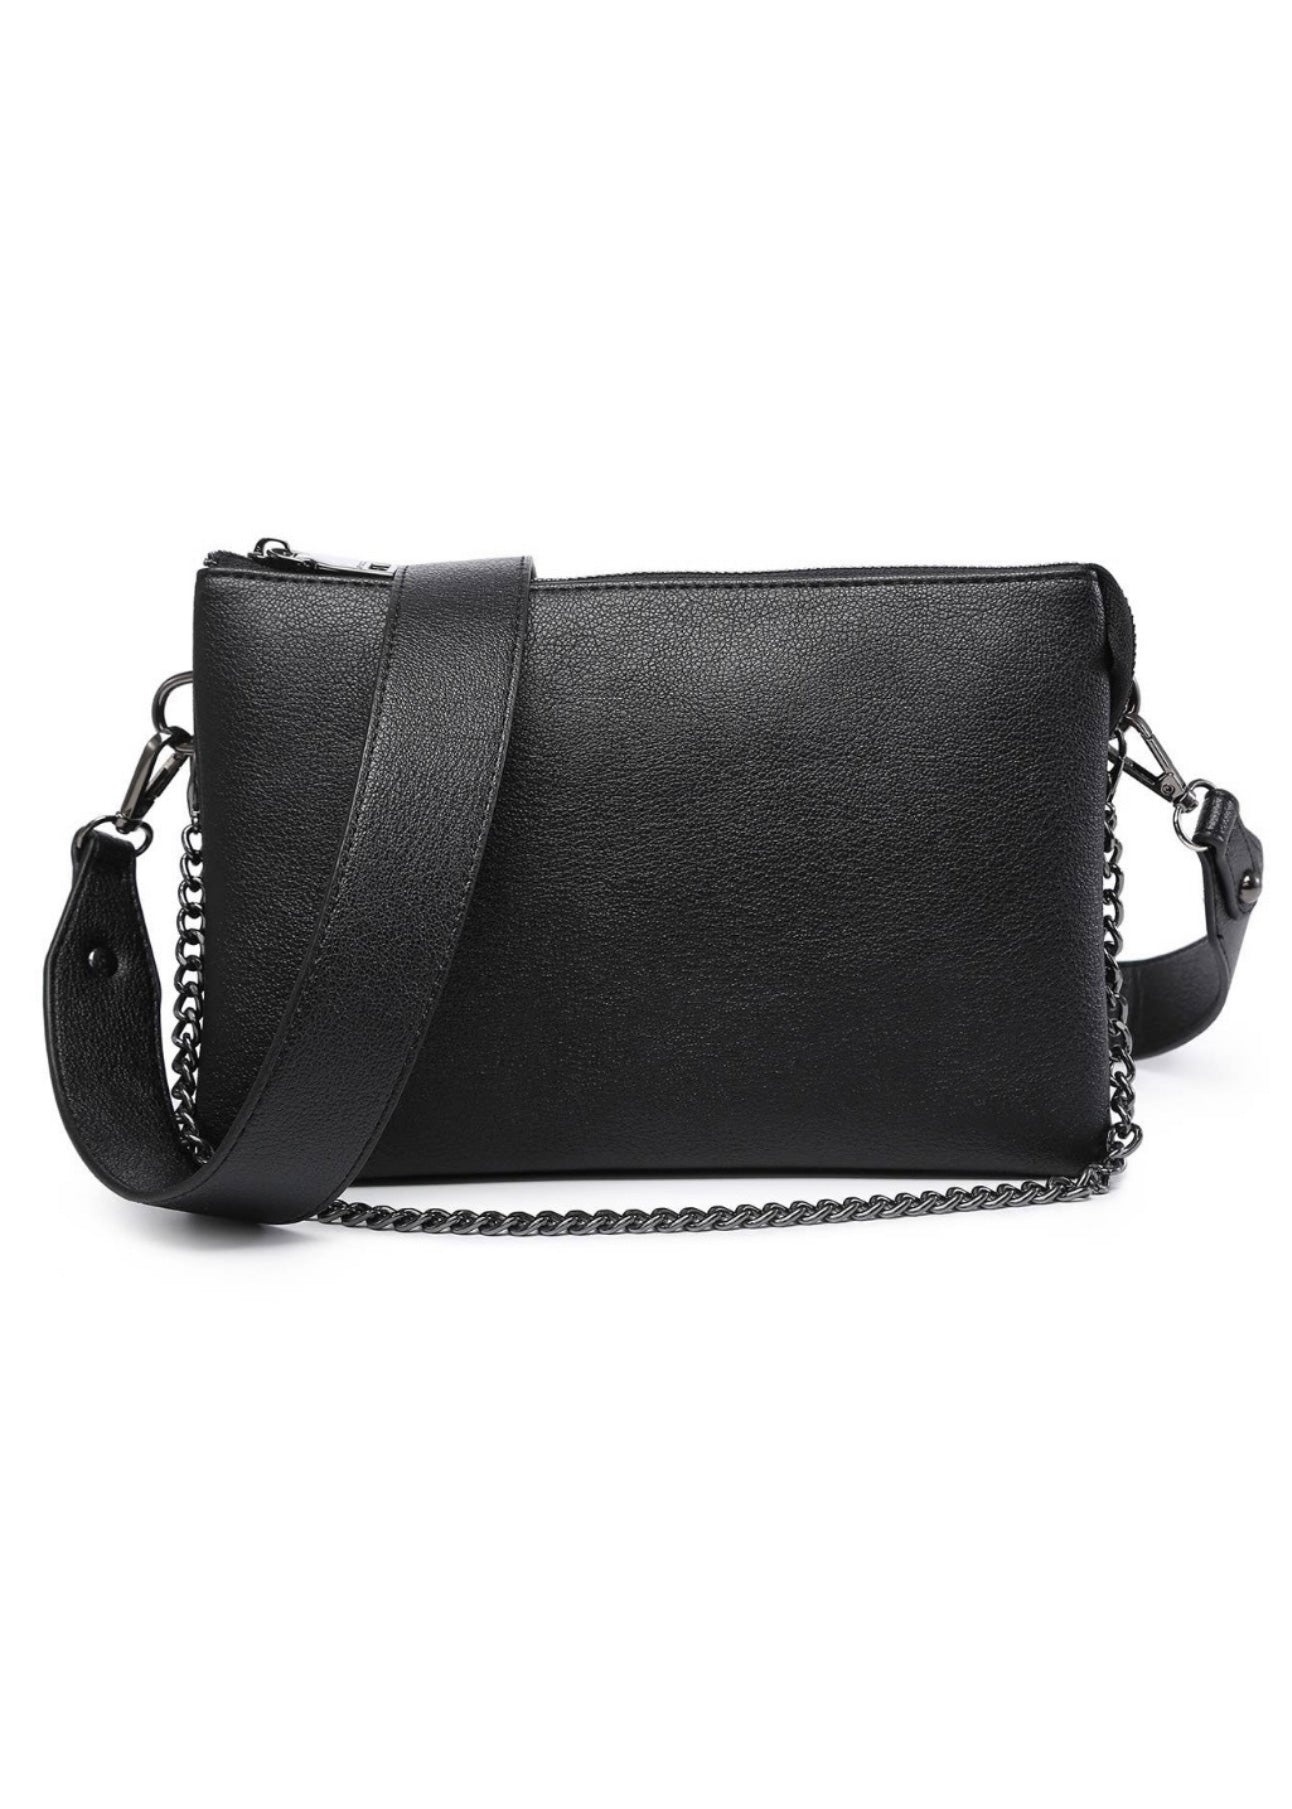 Black vegan leather crossbody purse with  2 removable straps. One strap is gun metal chain and the other is a vegan leather crossbody. Purse is 10 x 7 x 2 and had 3 compartments inside. 